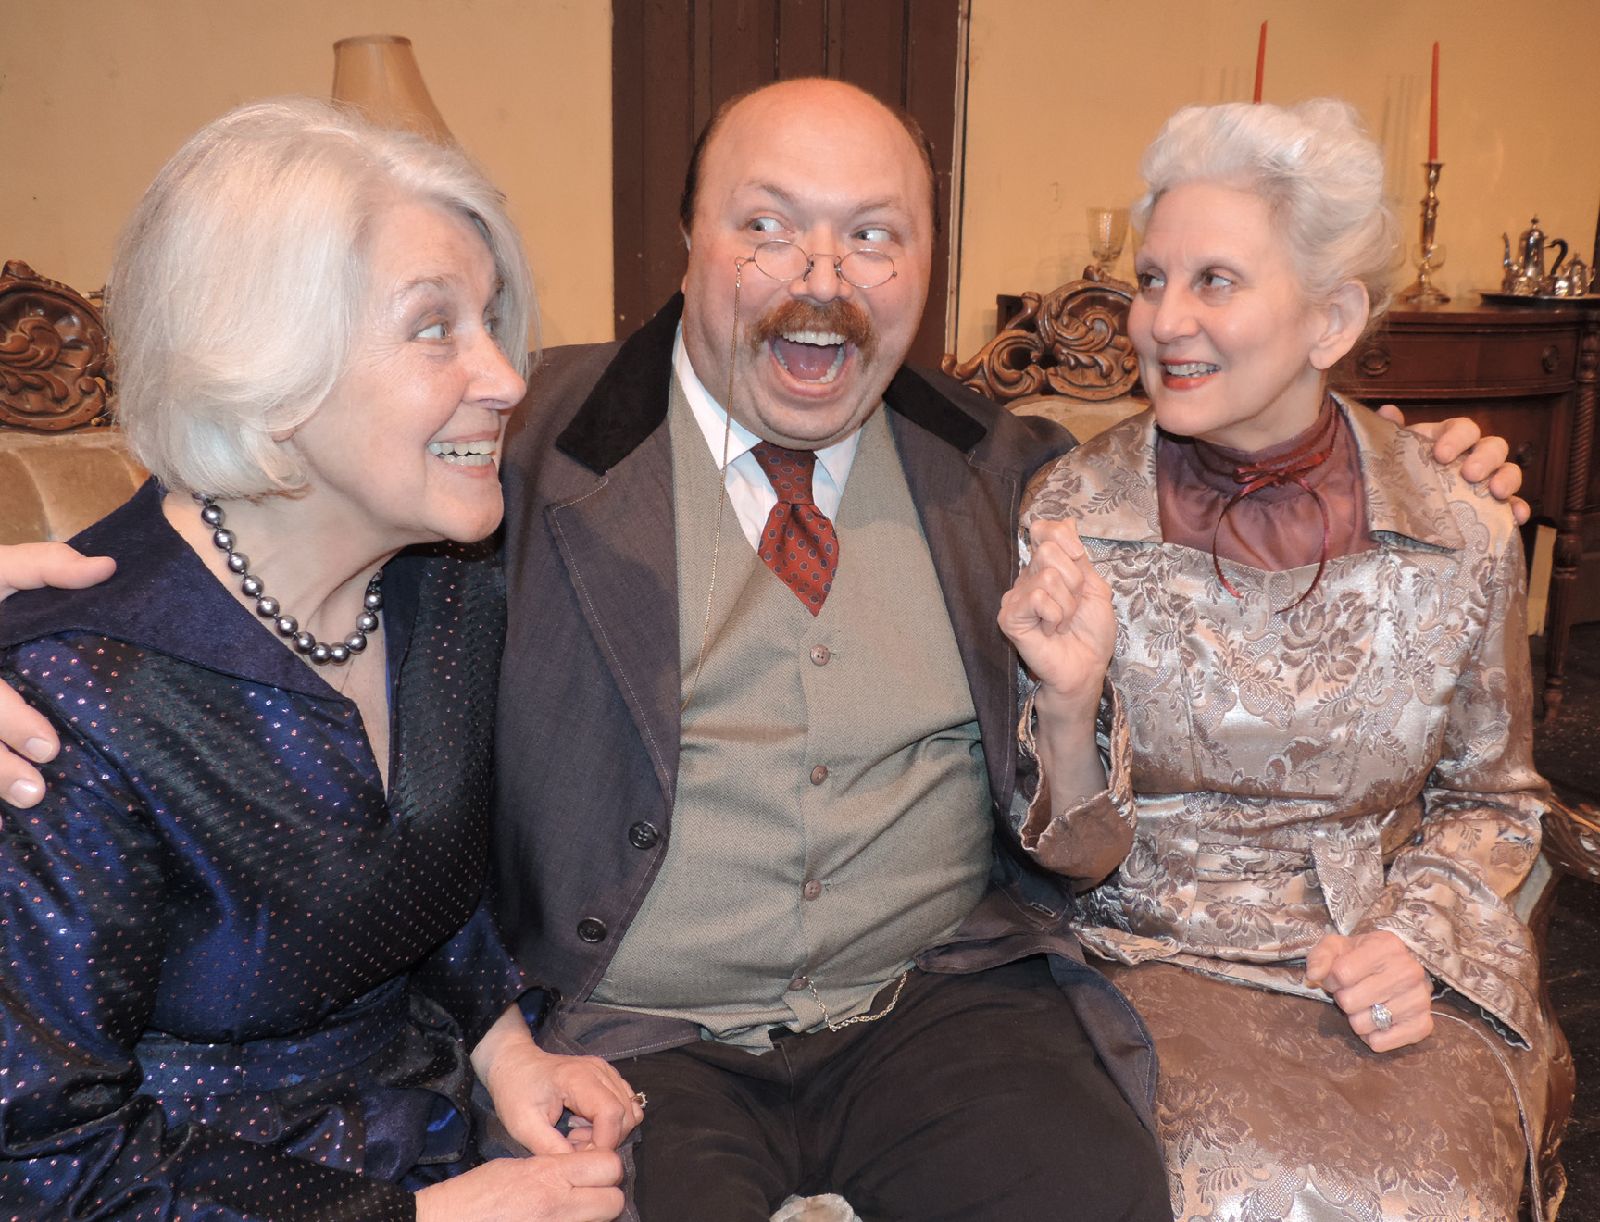 Two white-haired women in dresses sit with a bald man in a suit.